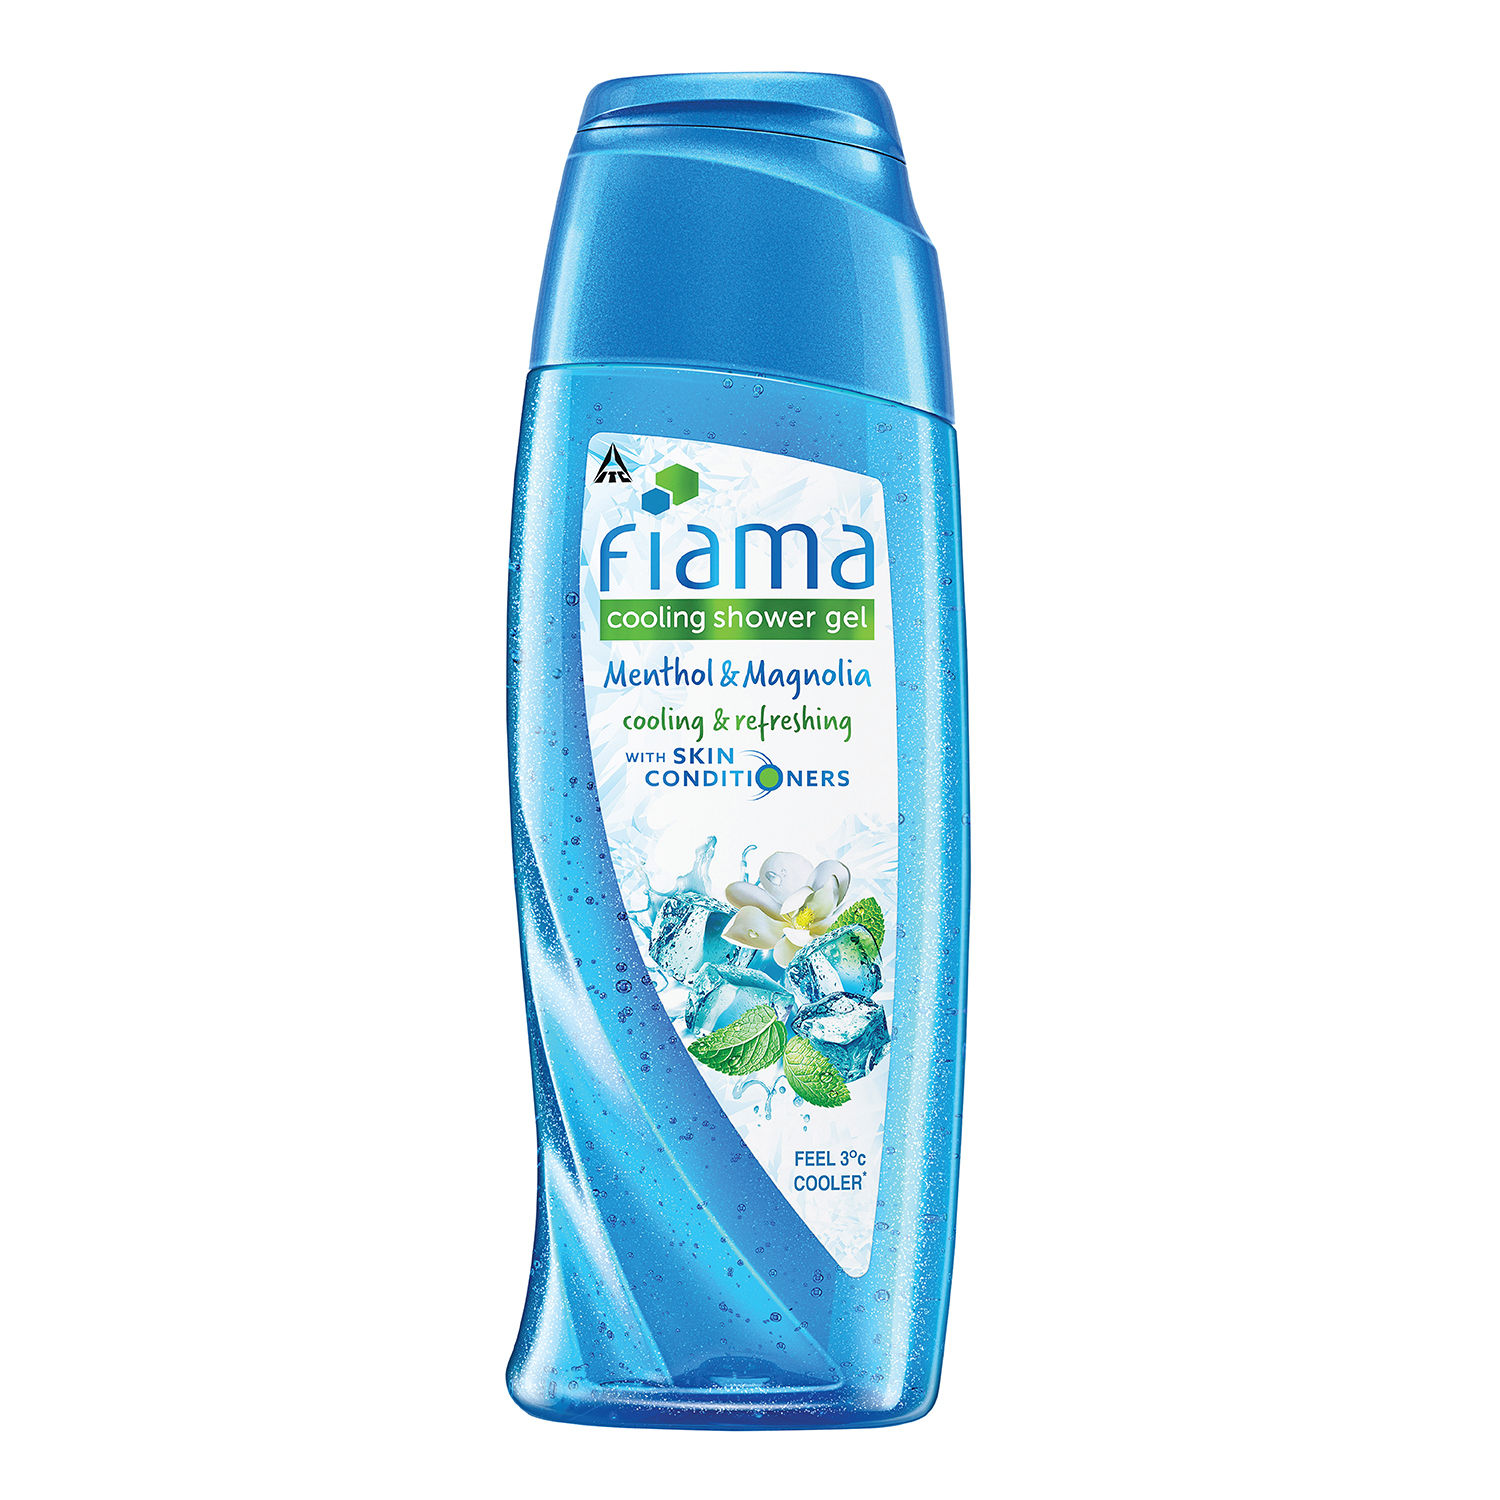 Buy Fiama Cooling Body Wash Shower Gel Menthol & Magnolia, 250ml, Body Wash for Men & Women with Skin Conditioners & Menthol for Icy-Cool & Refreshed Skin - Purplle